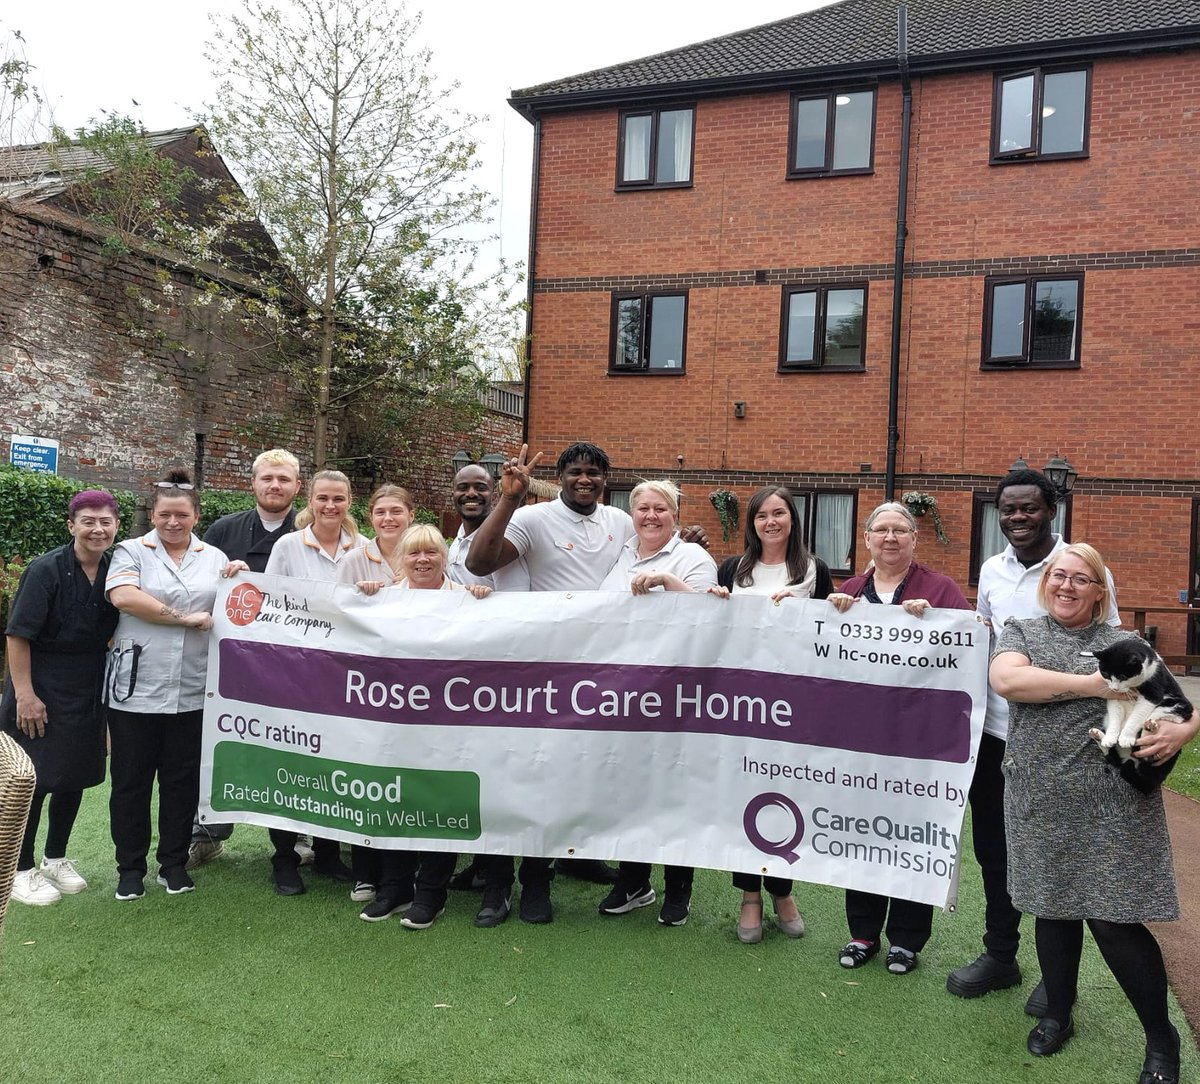 The team at our Rose Court care home are celebrating as they achieved 'Good' in their latest CQC Report with 'Outstanding' in well-led! 🍾🎈 Everyone is delighted, including George the Cat (in typical cat fashion he is holding in his emotions...) 🐱 Well done everyone!